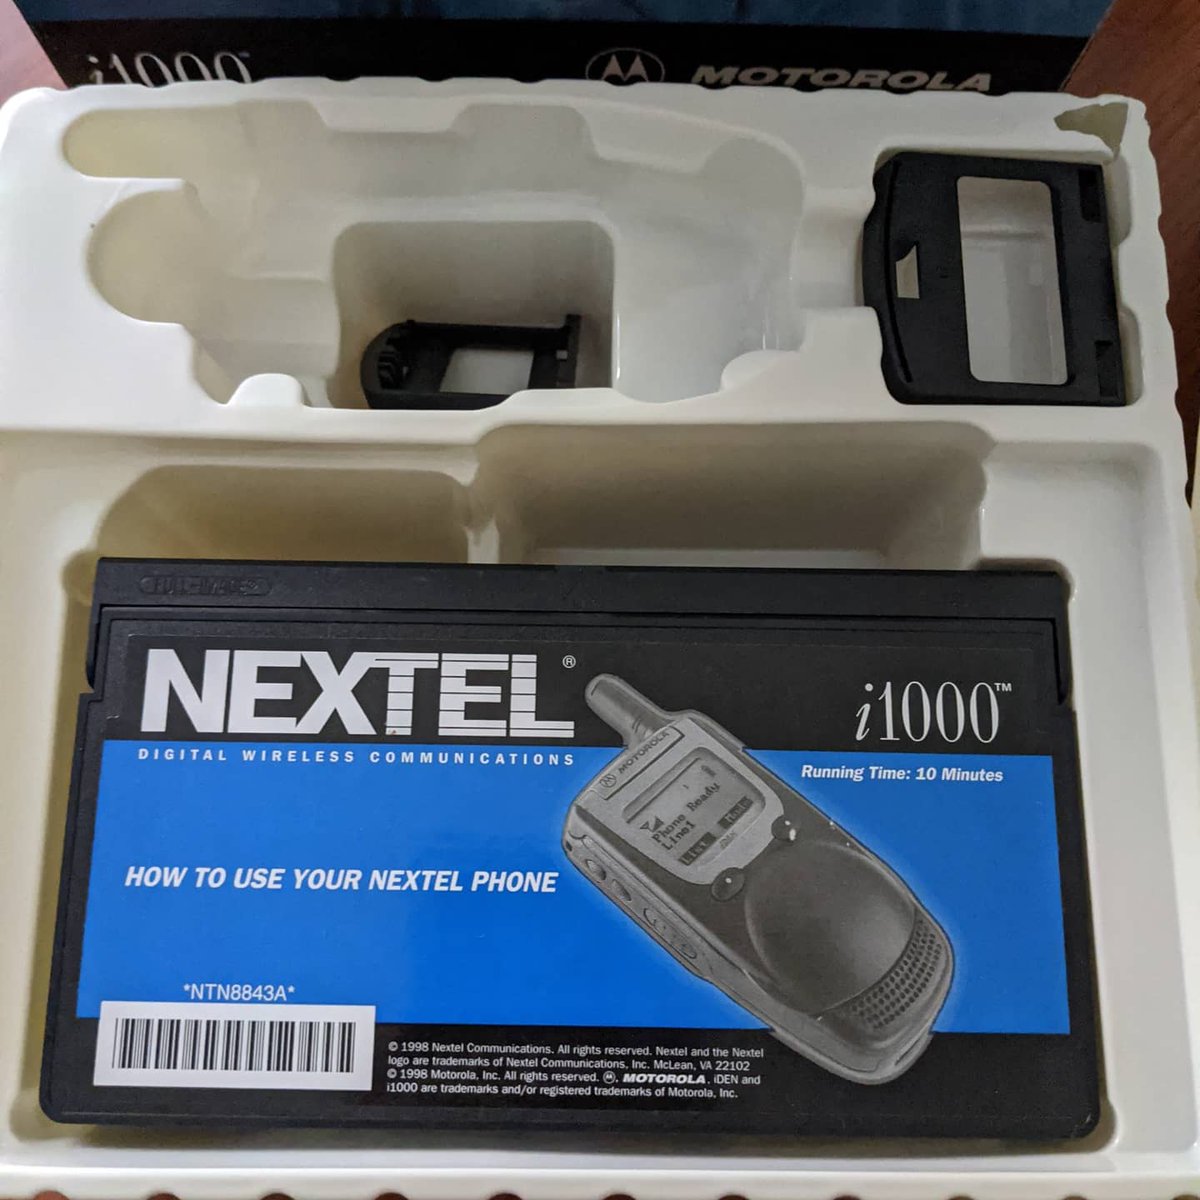 NEXTEL Motorola i1000  ESMR UHF 800 MHz/iDEN 800 MHz
Released in 1998
2/3 With two-way-radio feature 
To be continued ...
#nextel #motorola #moto #retrotech #retrophone #cellphone #usa #canada #mobilekeepers #phonekeepers